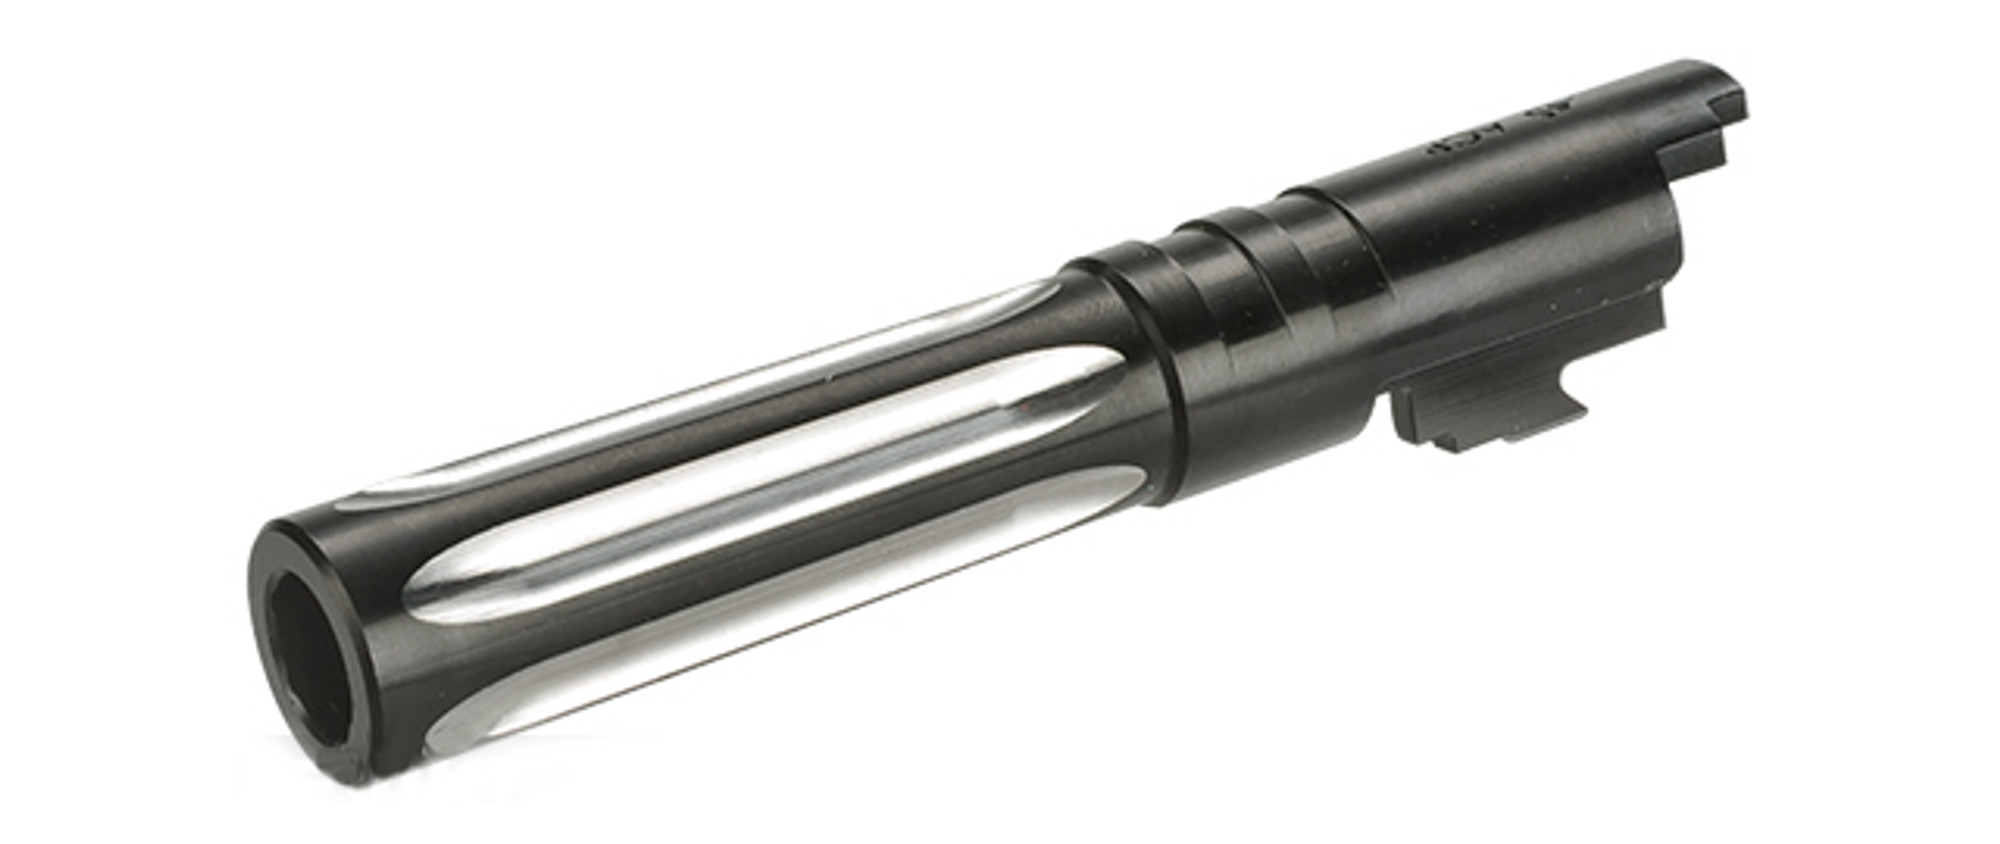 UAC Stainless Steel Fluted Outer Barrel for TM Hi-CAPA 4.3 Series Airsoft GBB Pistols - Black (.45 ACP)